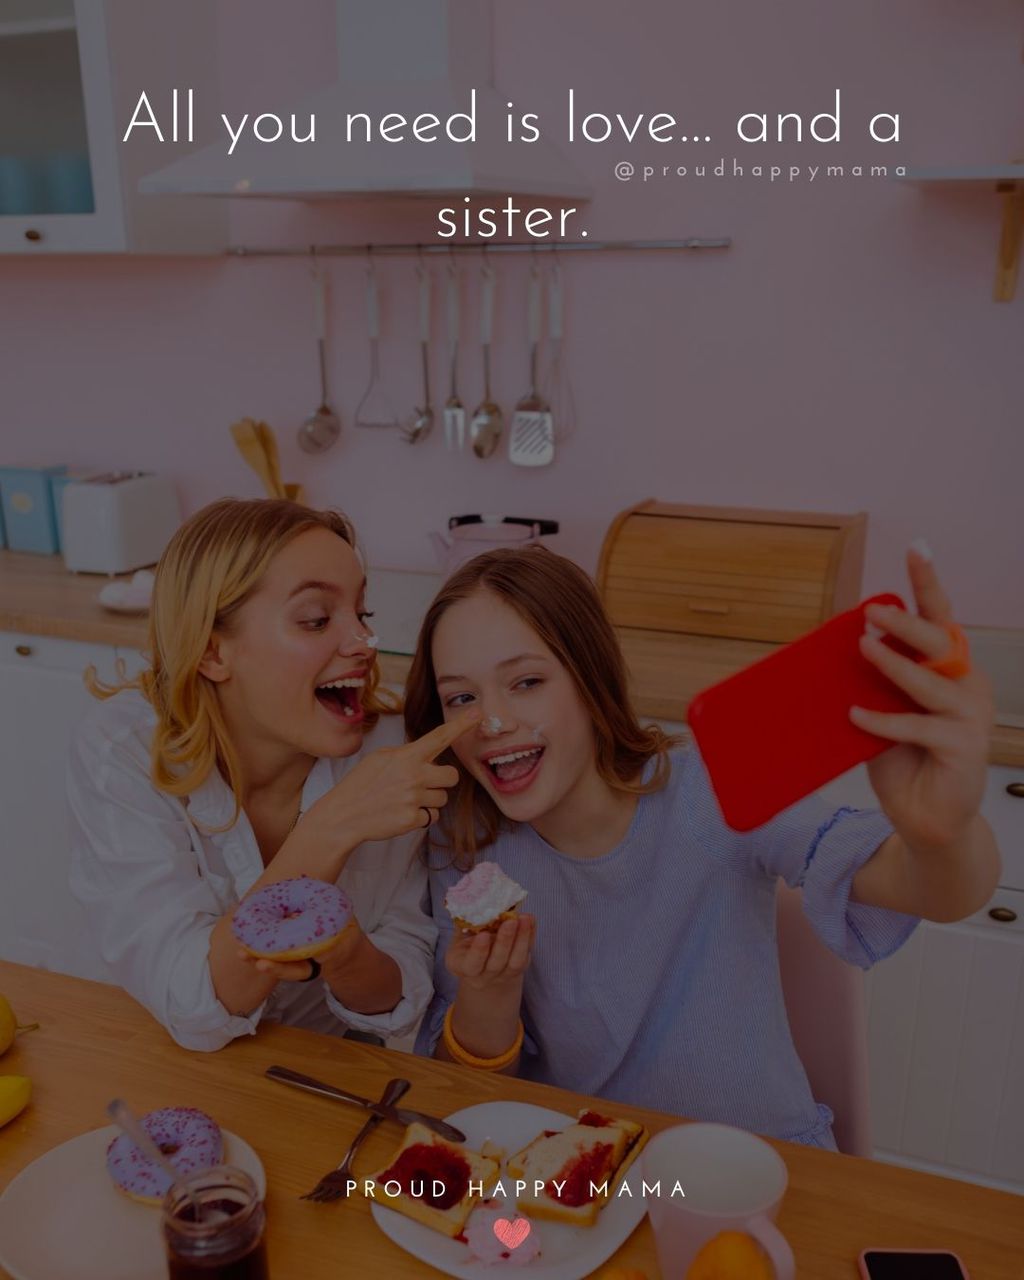 Sister Quotes - All you need is love and a sister.